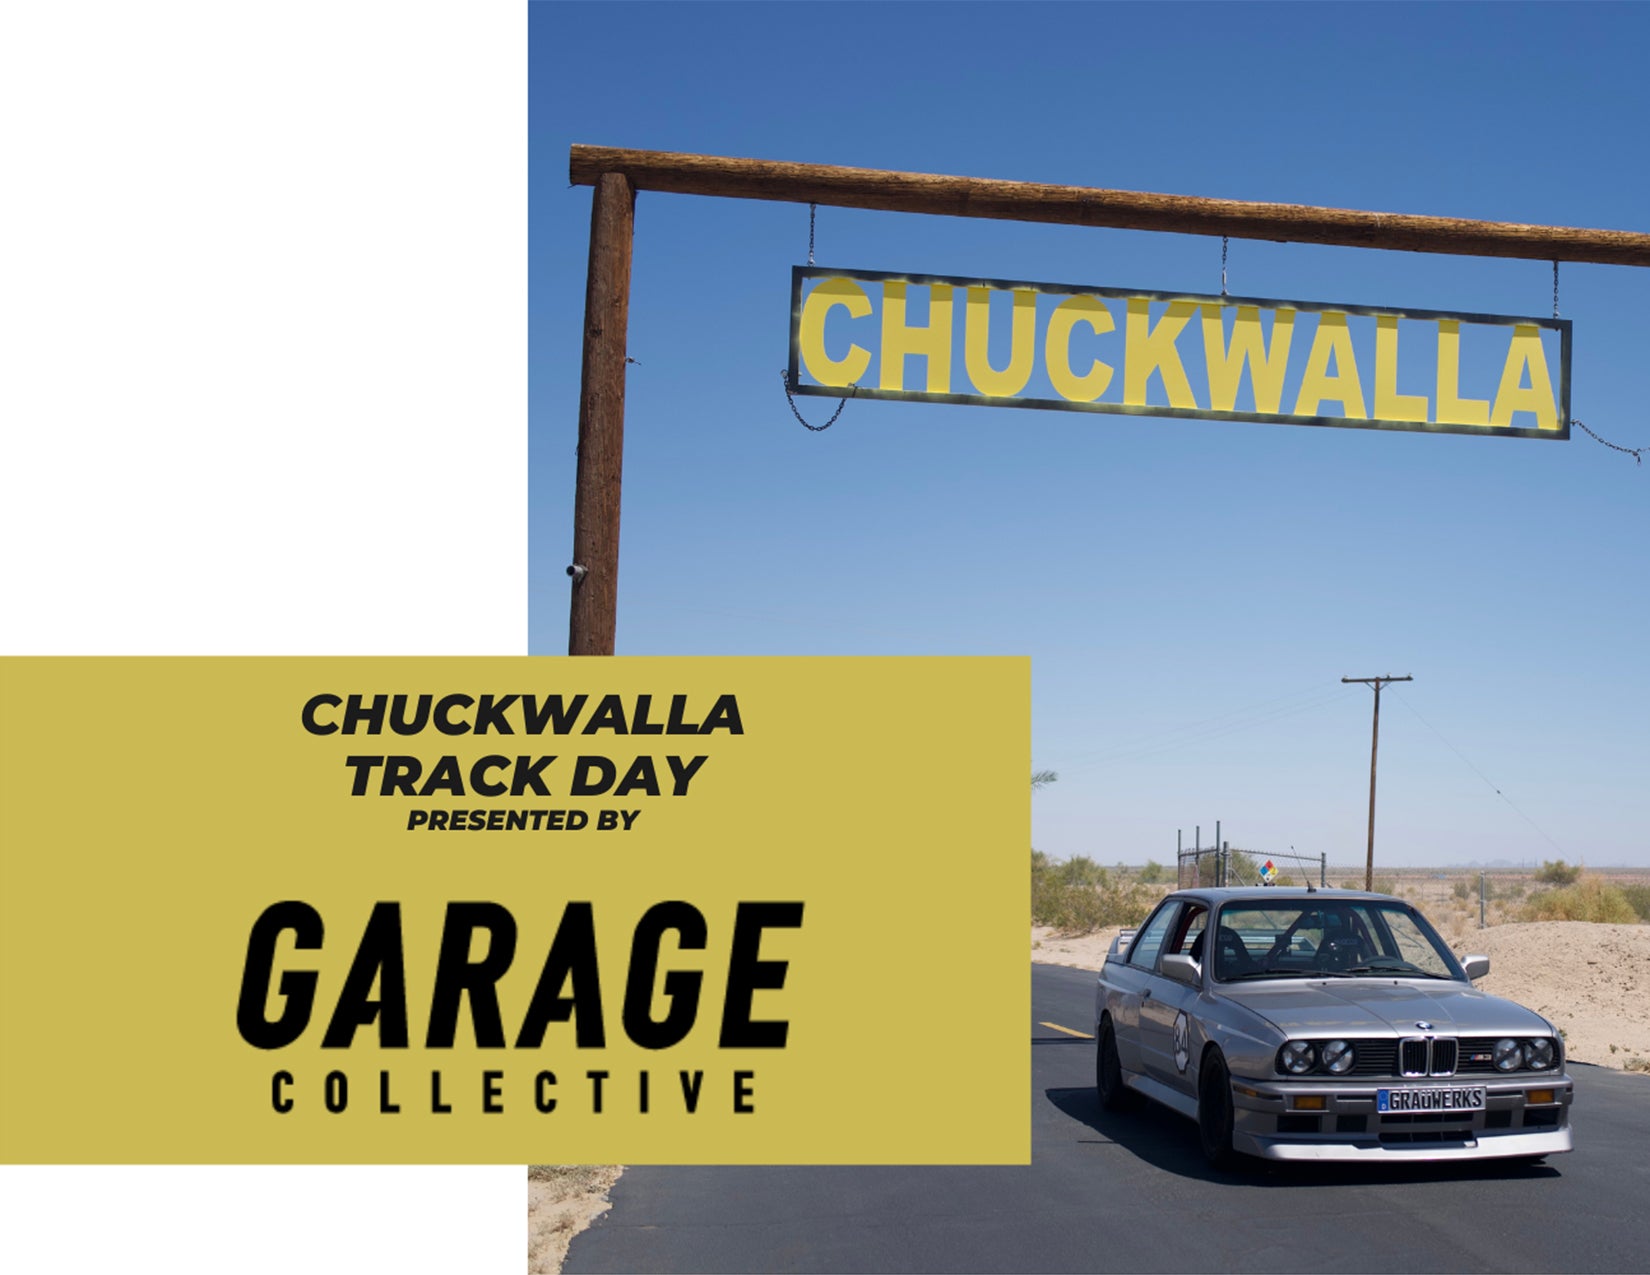 Members-Only Chuckwalla Track Day Details